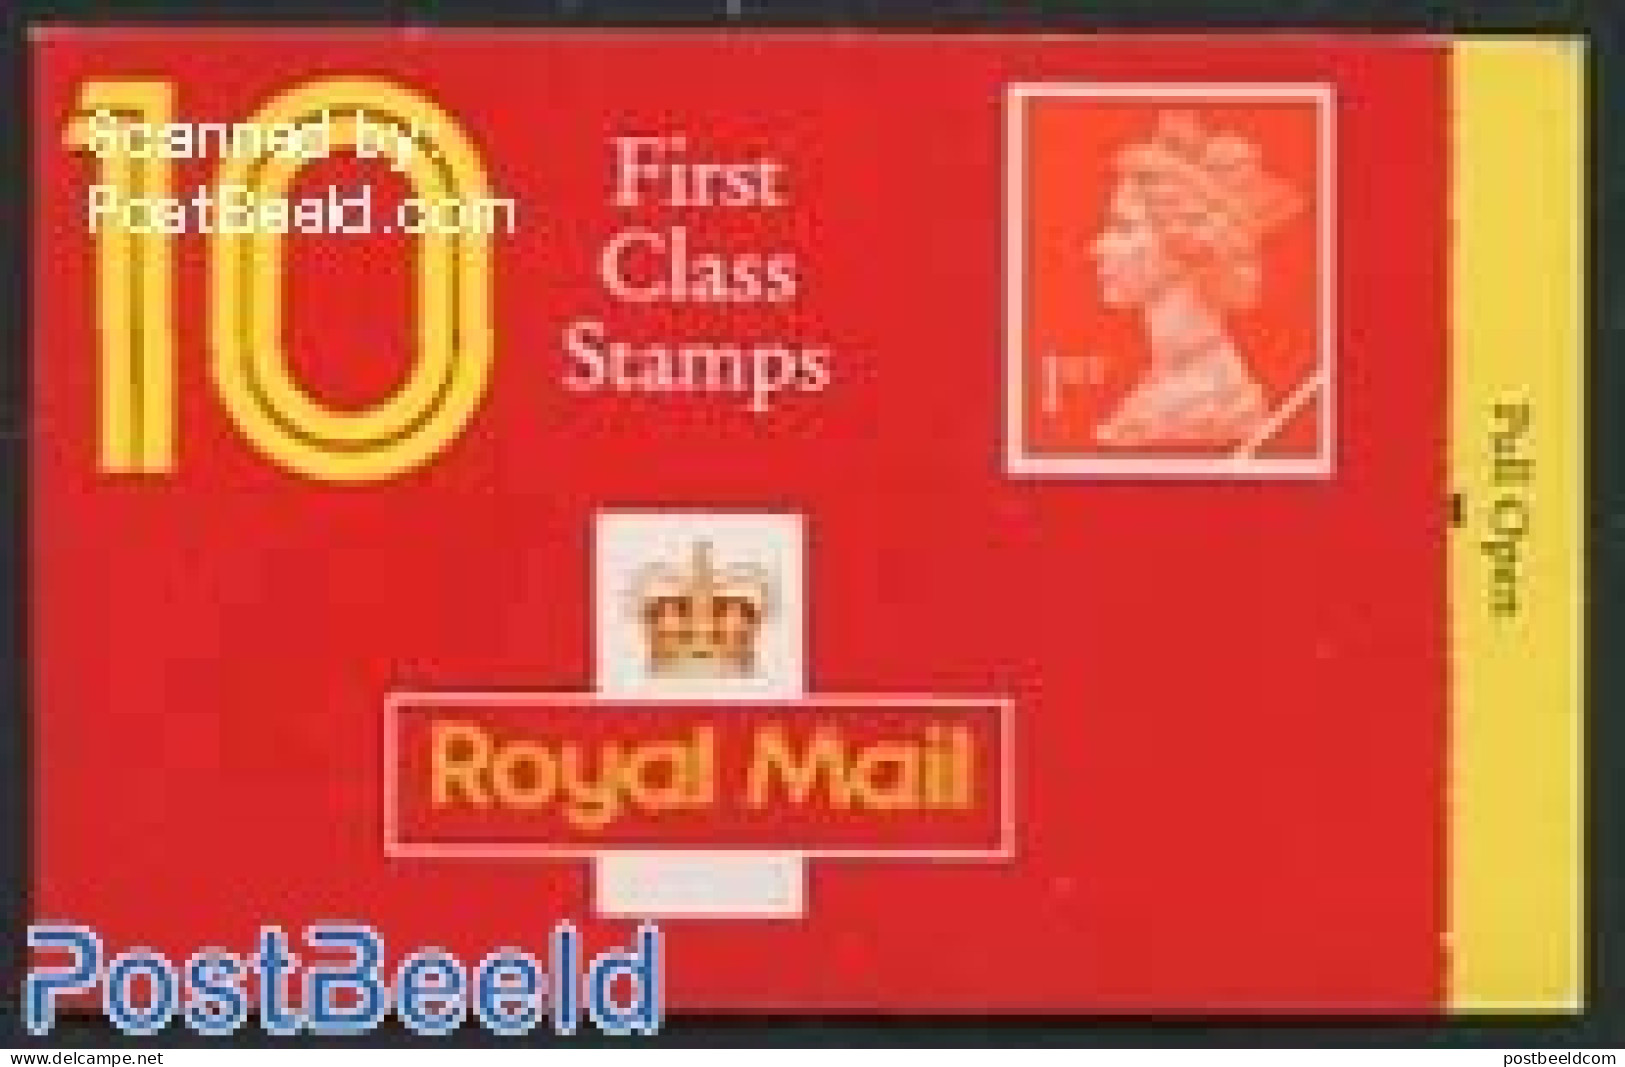 Great Britain 1990 Definitives Booklet, Walsall, Freepost London Inside, Mint NH, Stamp Booklets - Neufs